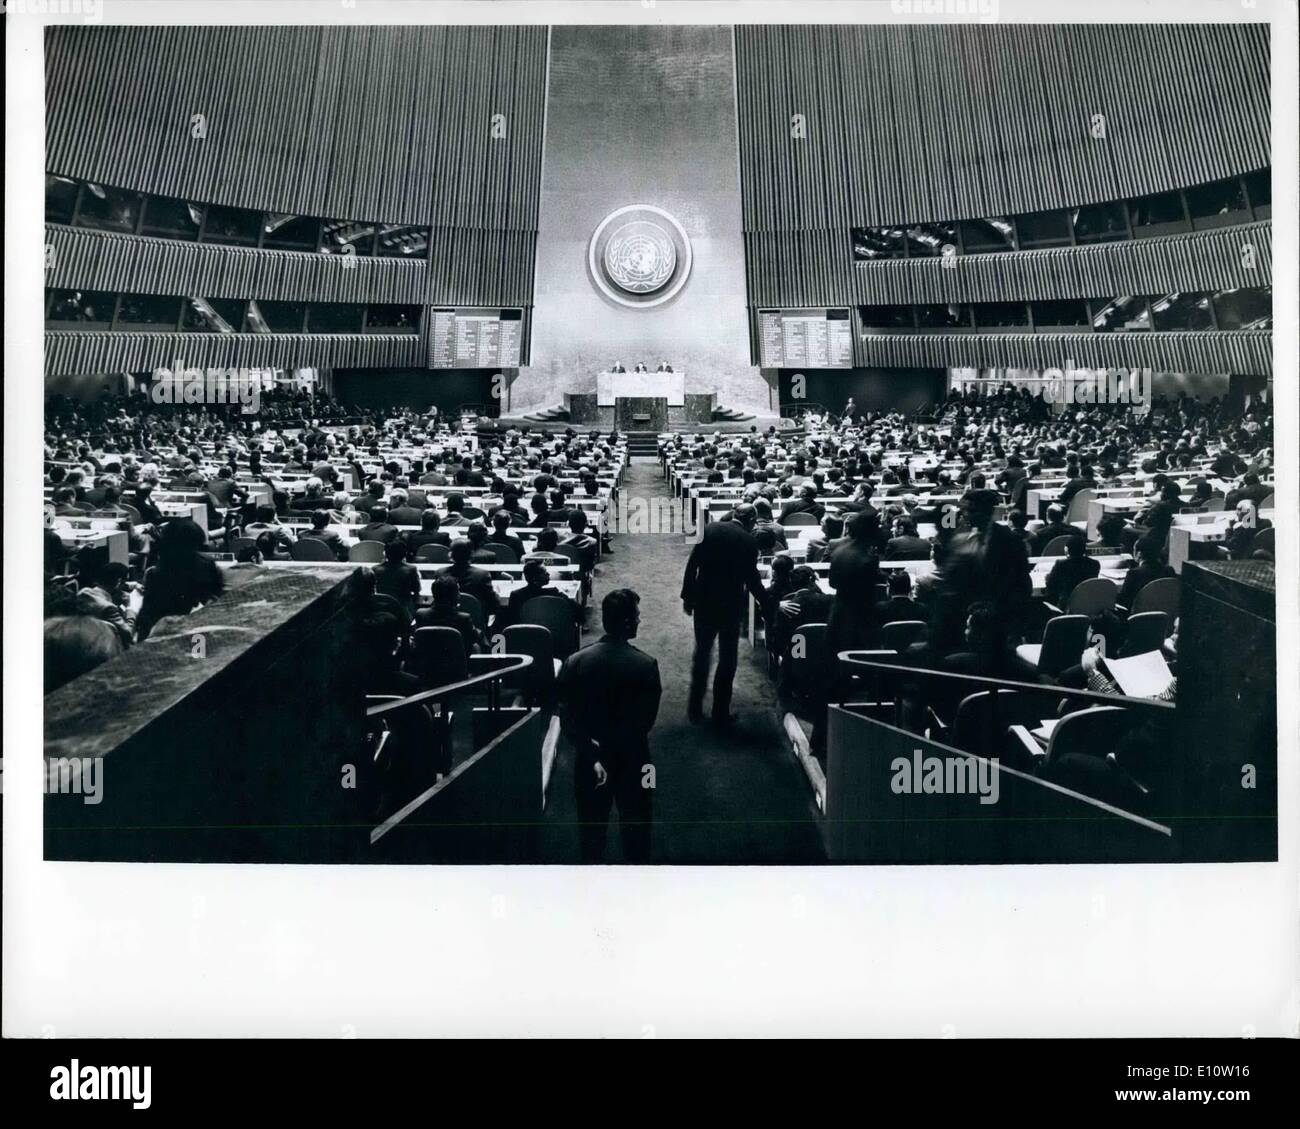 Apr. 04, 1974 - General Assembly Begins Special Session On Raw Materials and Development: The General Assembly this afternoon opened its sixth special session, which was called, at the request of Algeria, to study the problems of raw materials and development. Lopoldo Benites (Ecuador), President of the twenty-eight regular session of the Assembly, was elected by acclamation as President of the special session, and an Ad Hoc Committee was established. A general view of the meeting. Credit: United Nations Stock Photo